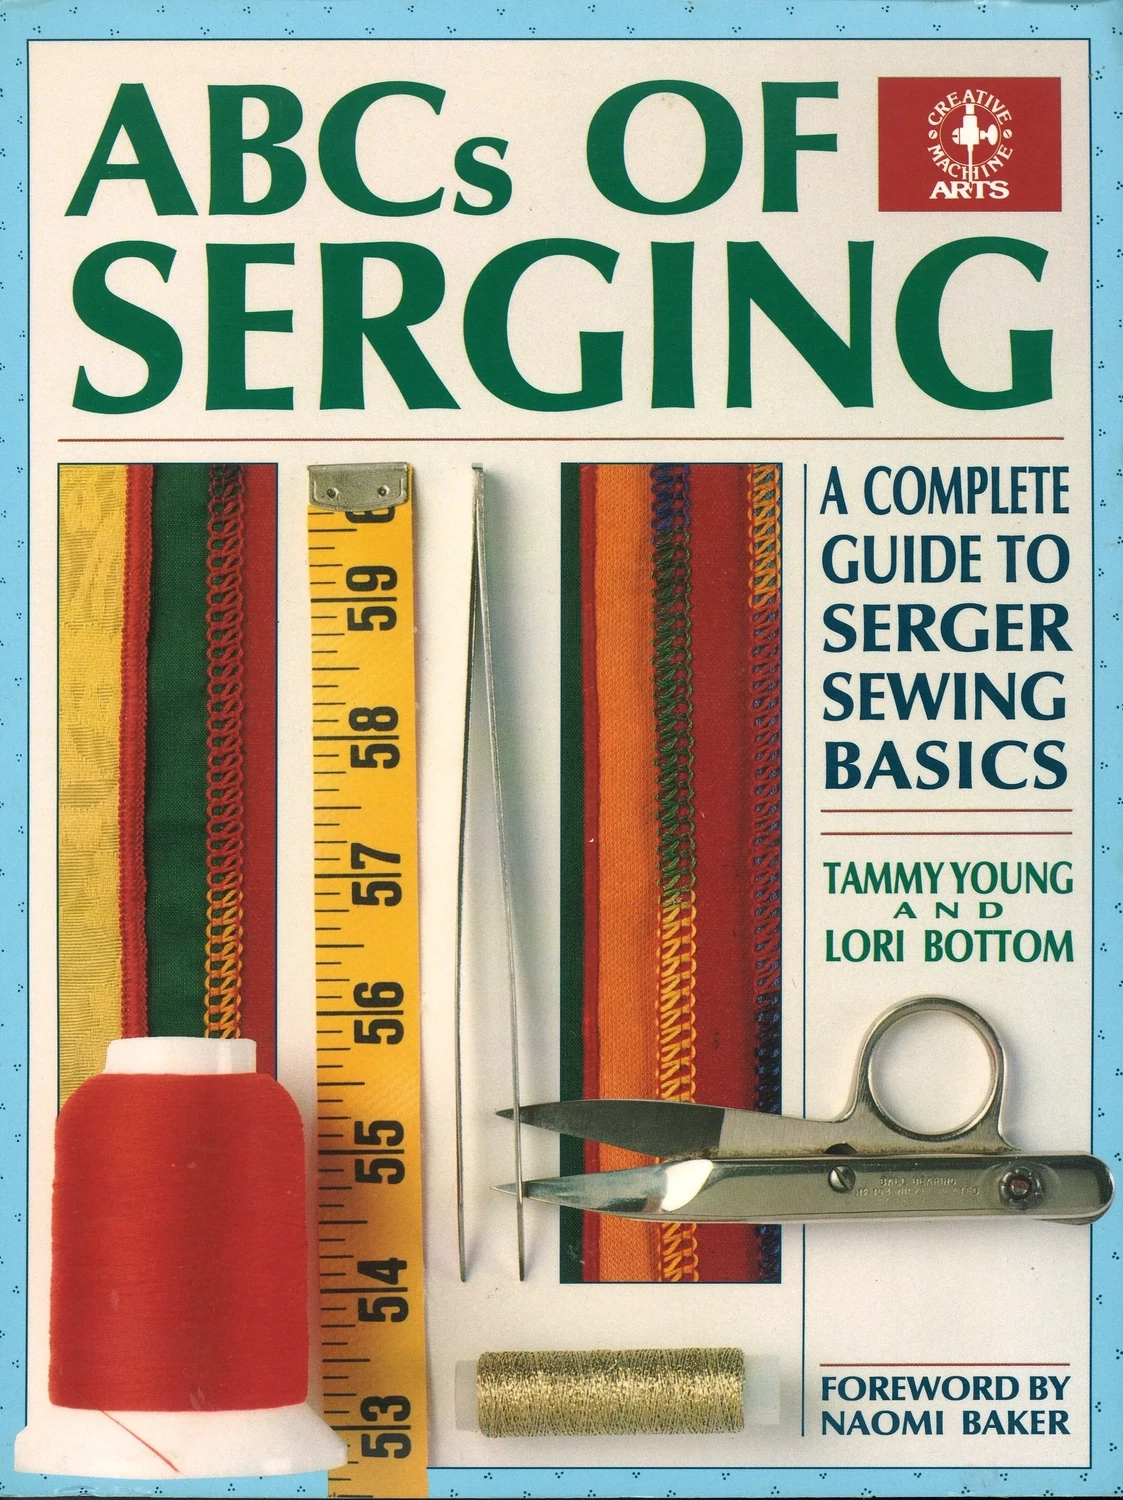 ABCs of Serging by Tammy Young, Lori Bottom